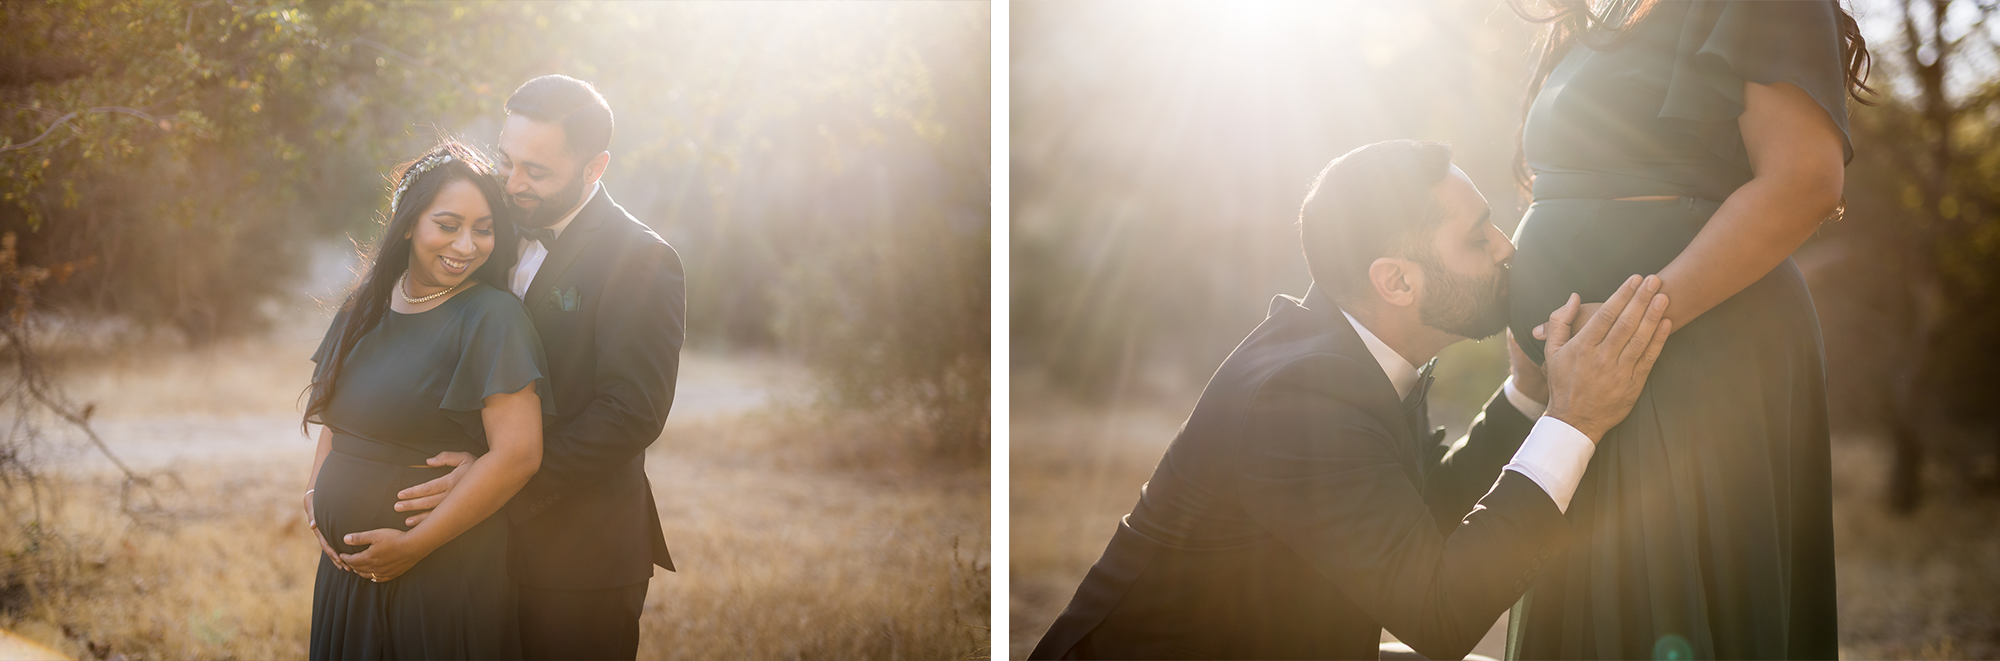 2-RS-Irvine-Regional-Park-Maternity-Photos-Andrew-Kwak-Photography.png